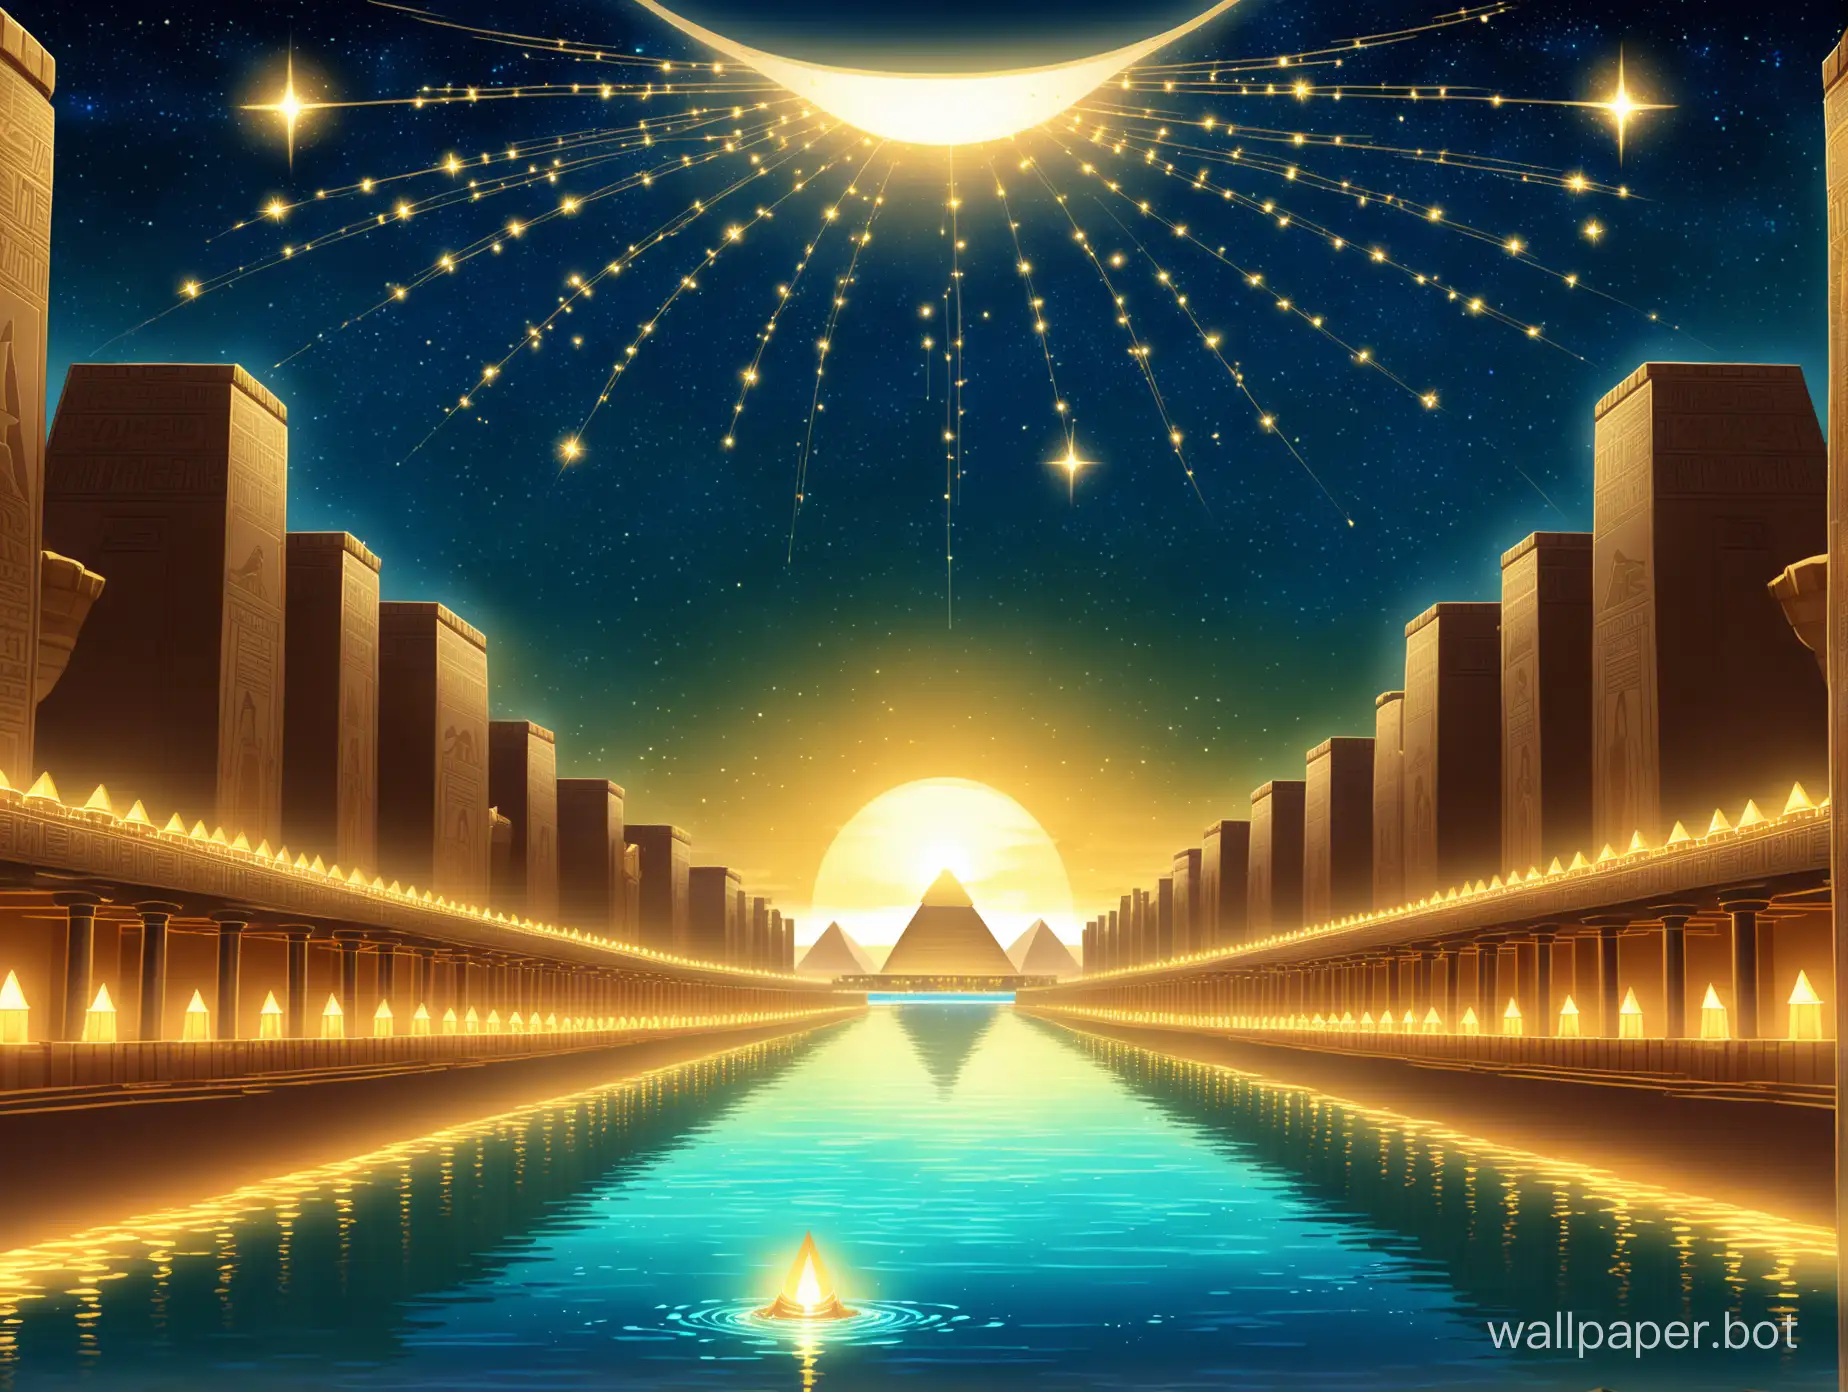 2d fighting game stage, floor level, atemporal mystic battleground of the gods, legendary Egypt Karkat at night, ancient giant Egypt buildings profusely decorated and made anew  under a constellation sky gently lightly bathed by the Nile waters and lotus canopy , all lit from below